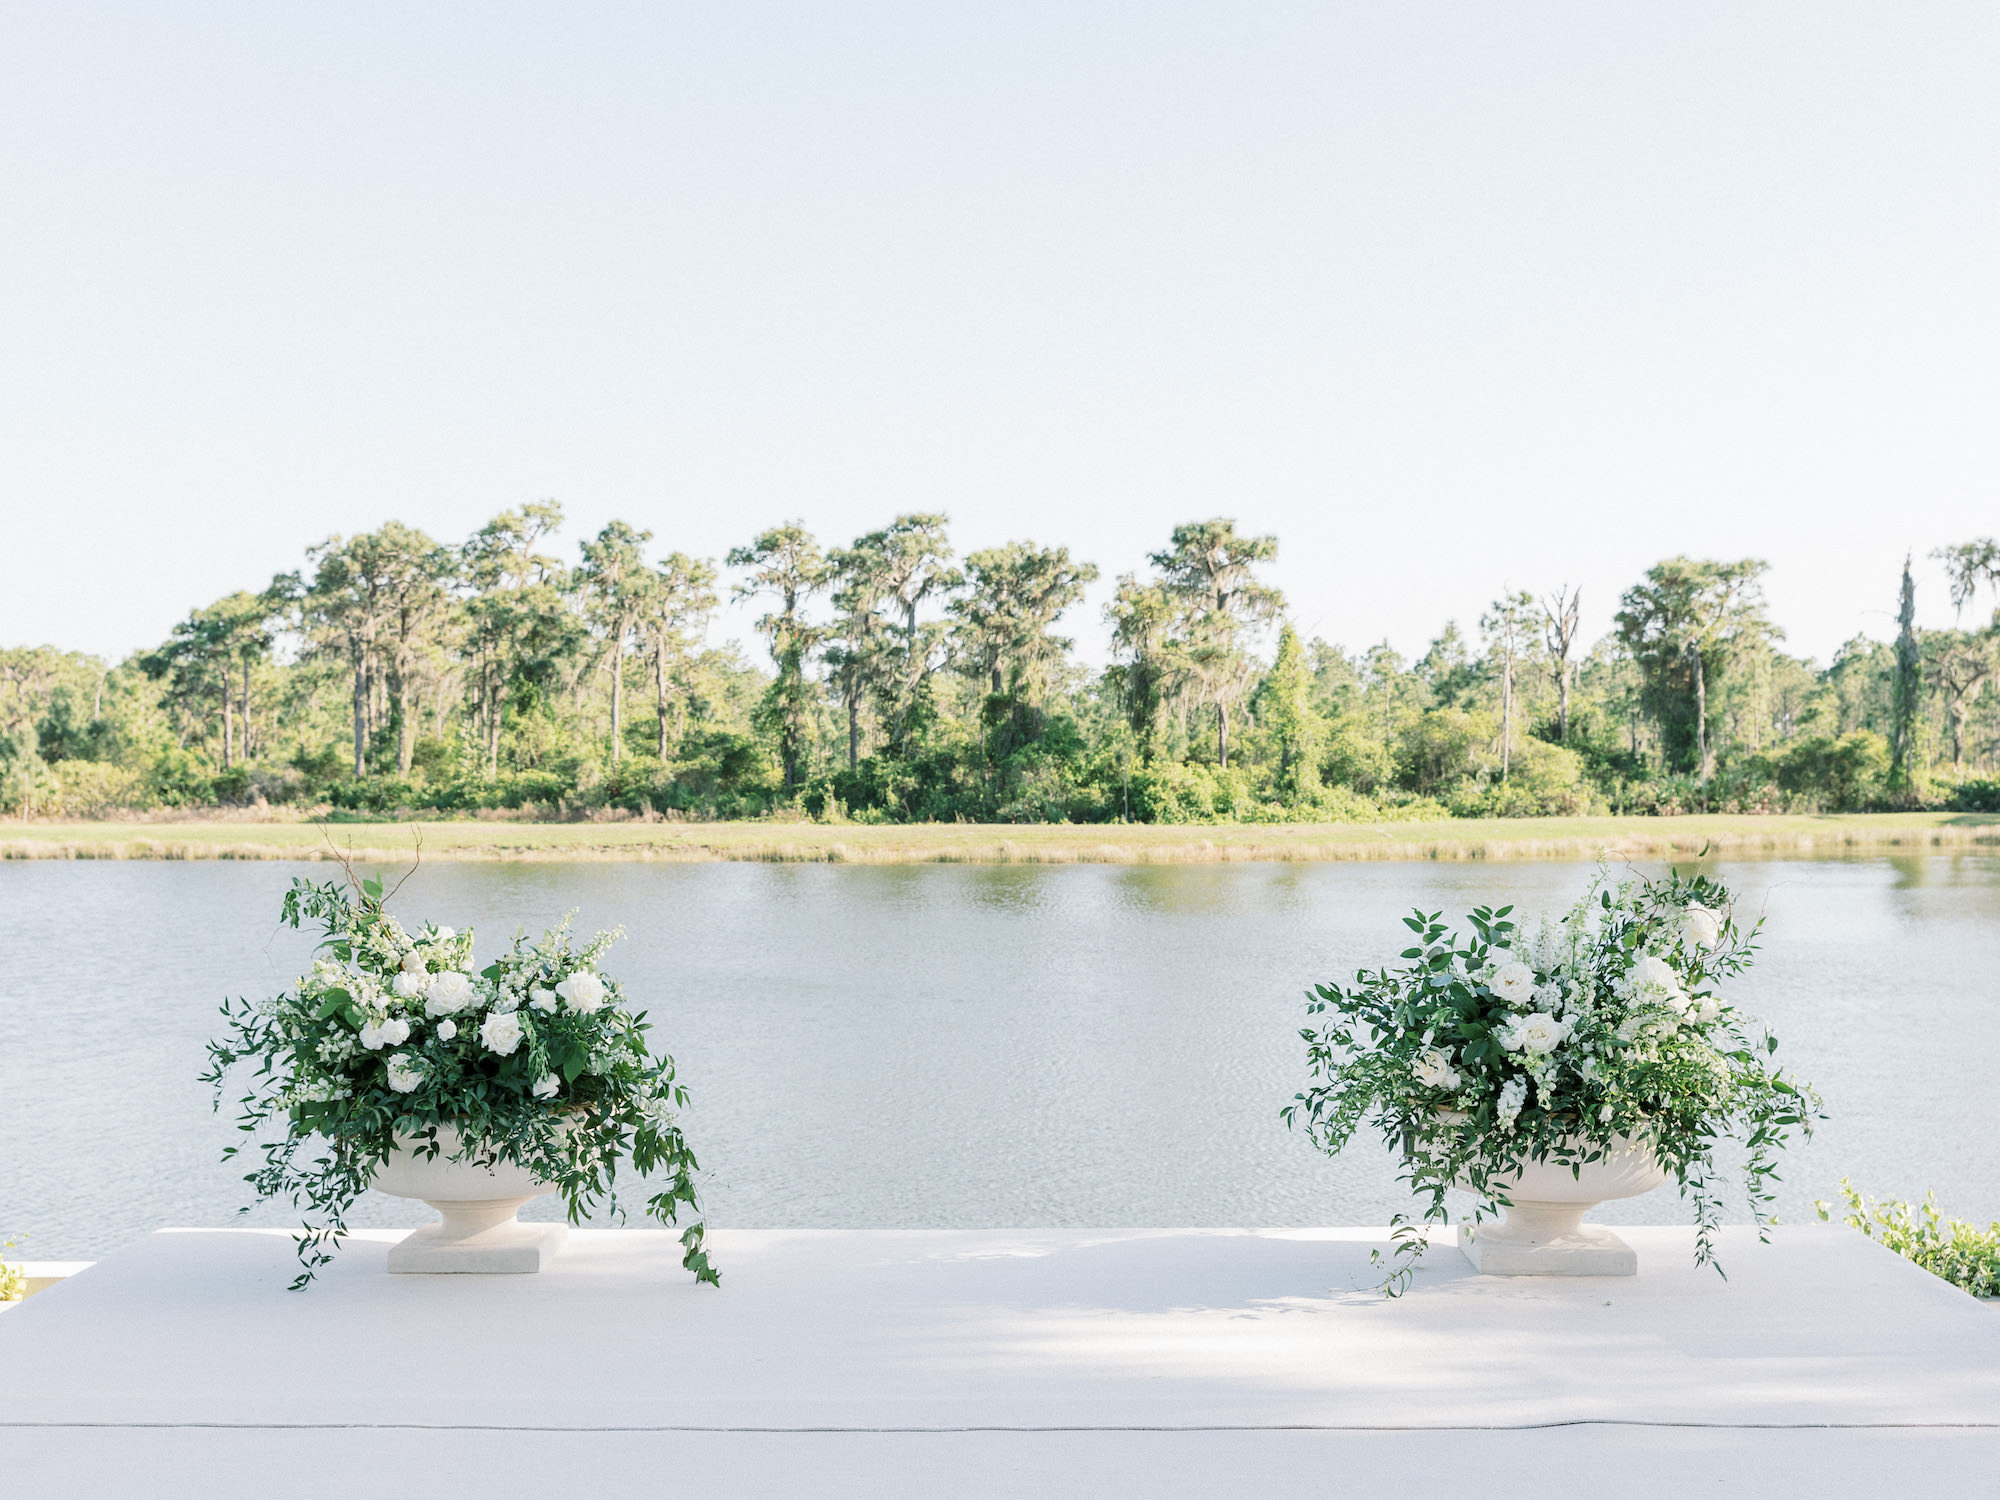 Old Florida Elegant Outdoor Waterfront Wedding Ceremony, Greenery and White Roses Floral Arrangements | Tampa Bay Wedding Venue Concession Golf Club